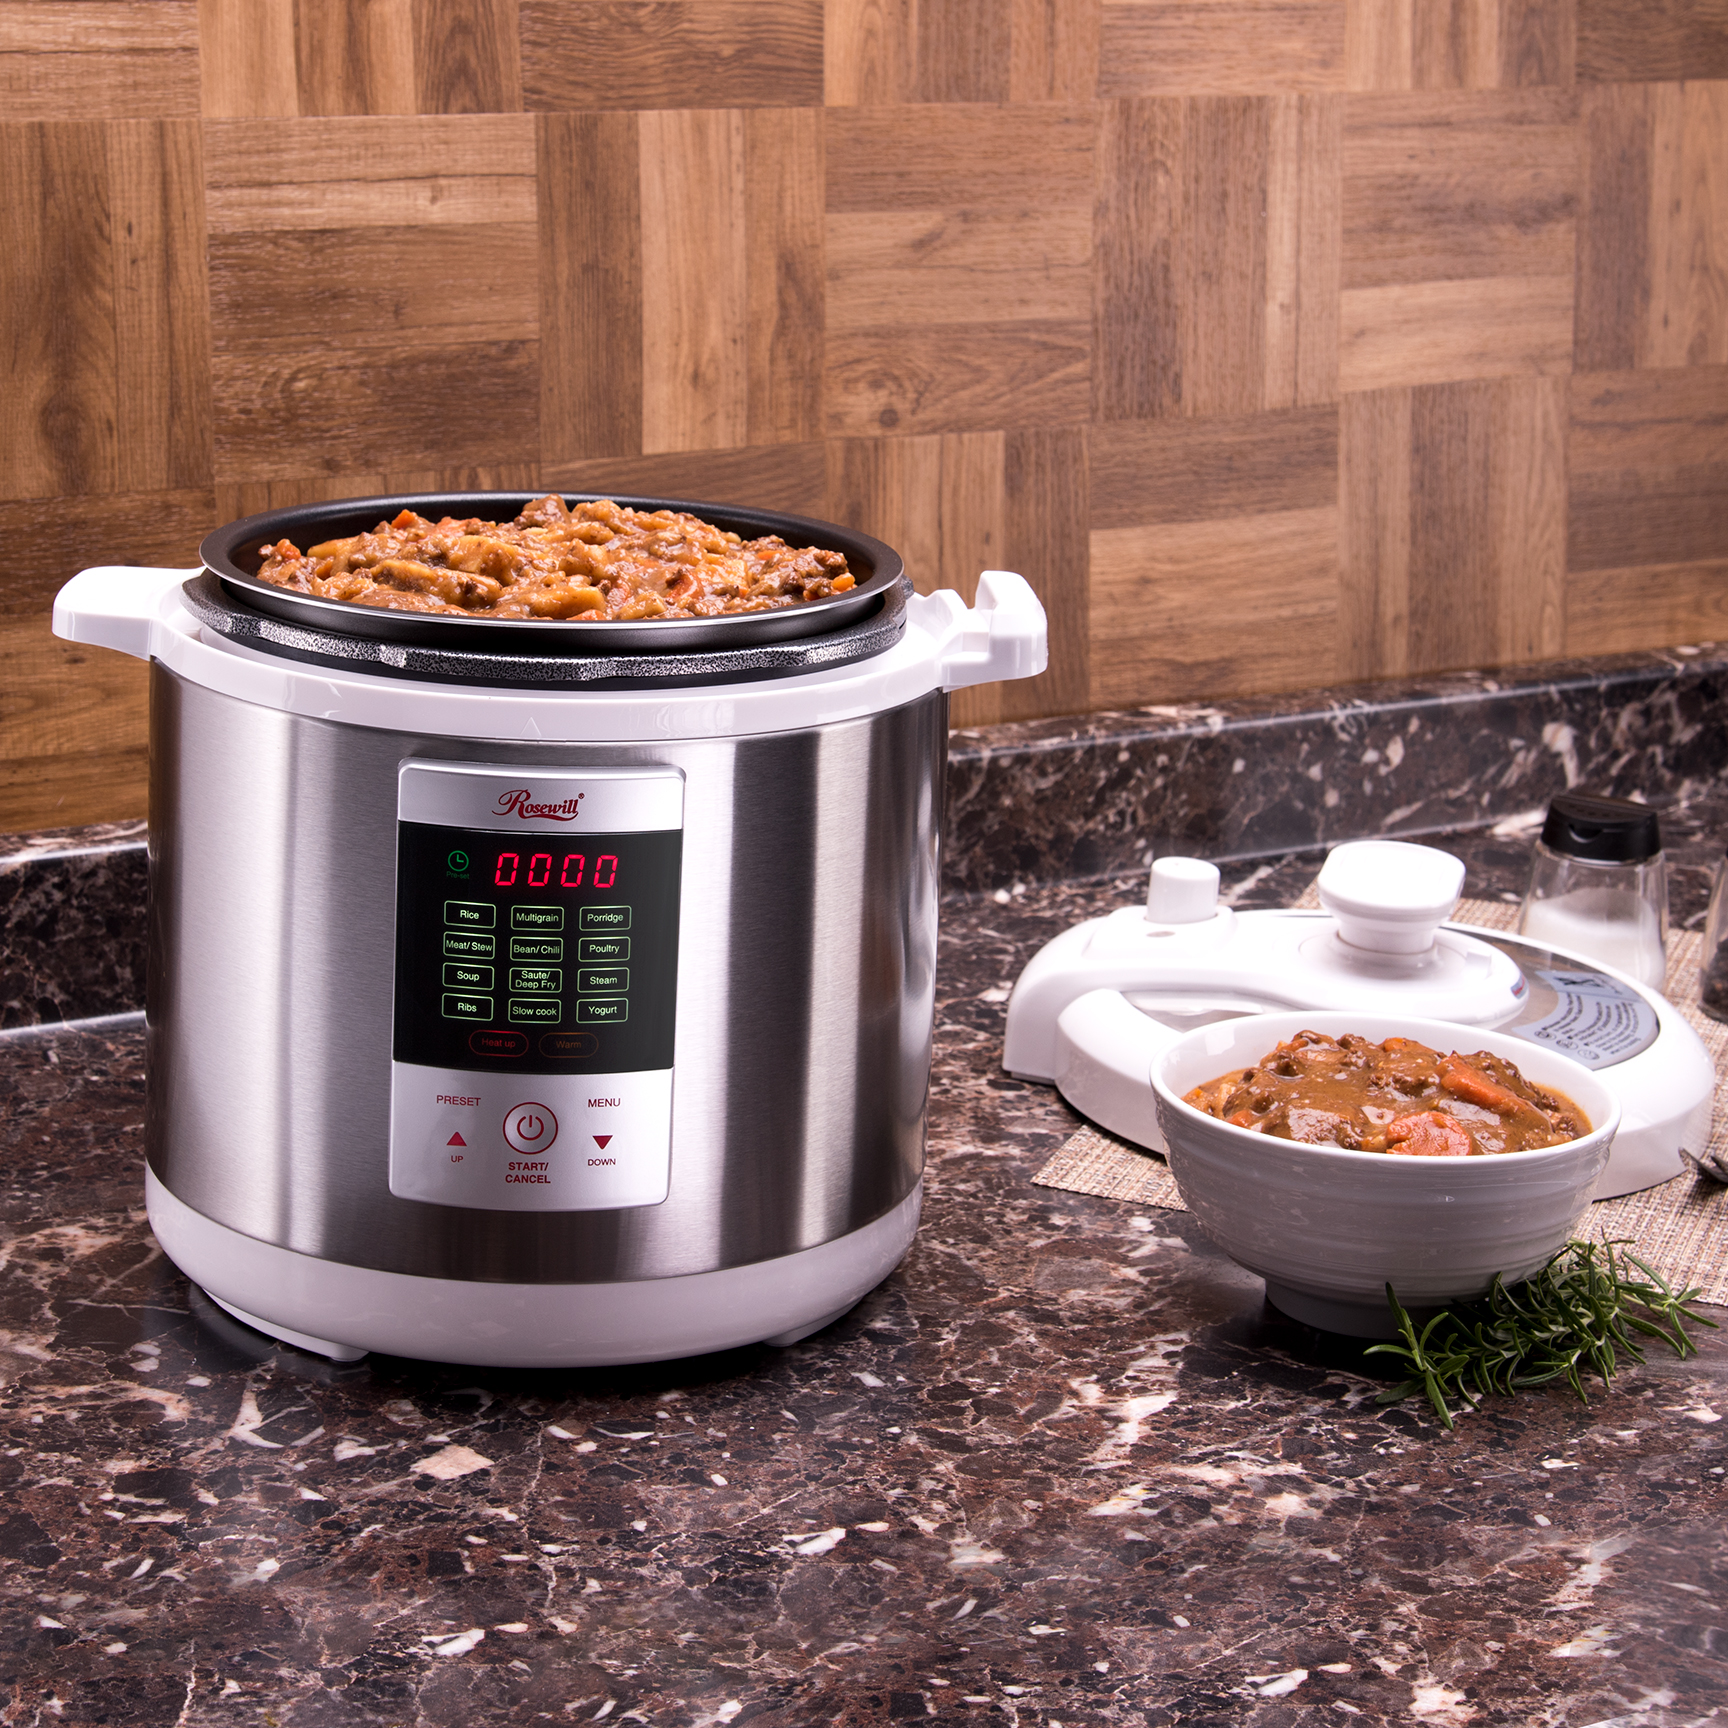 Rosewill RHPC-15001 Programmable 6.3 Quart 1000W Electric Pressure Cooker - image 2 of 7